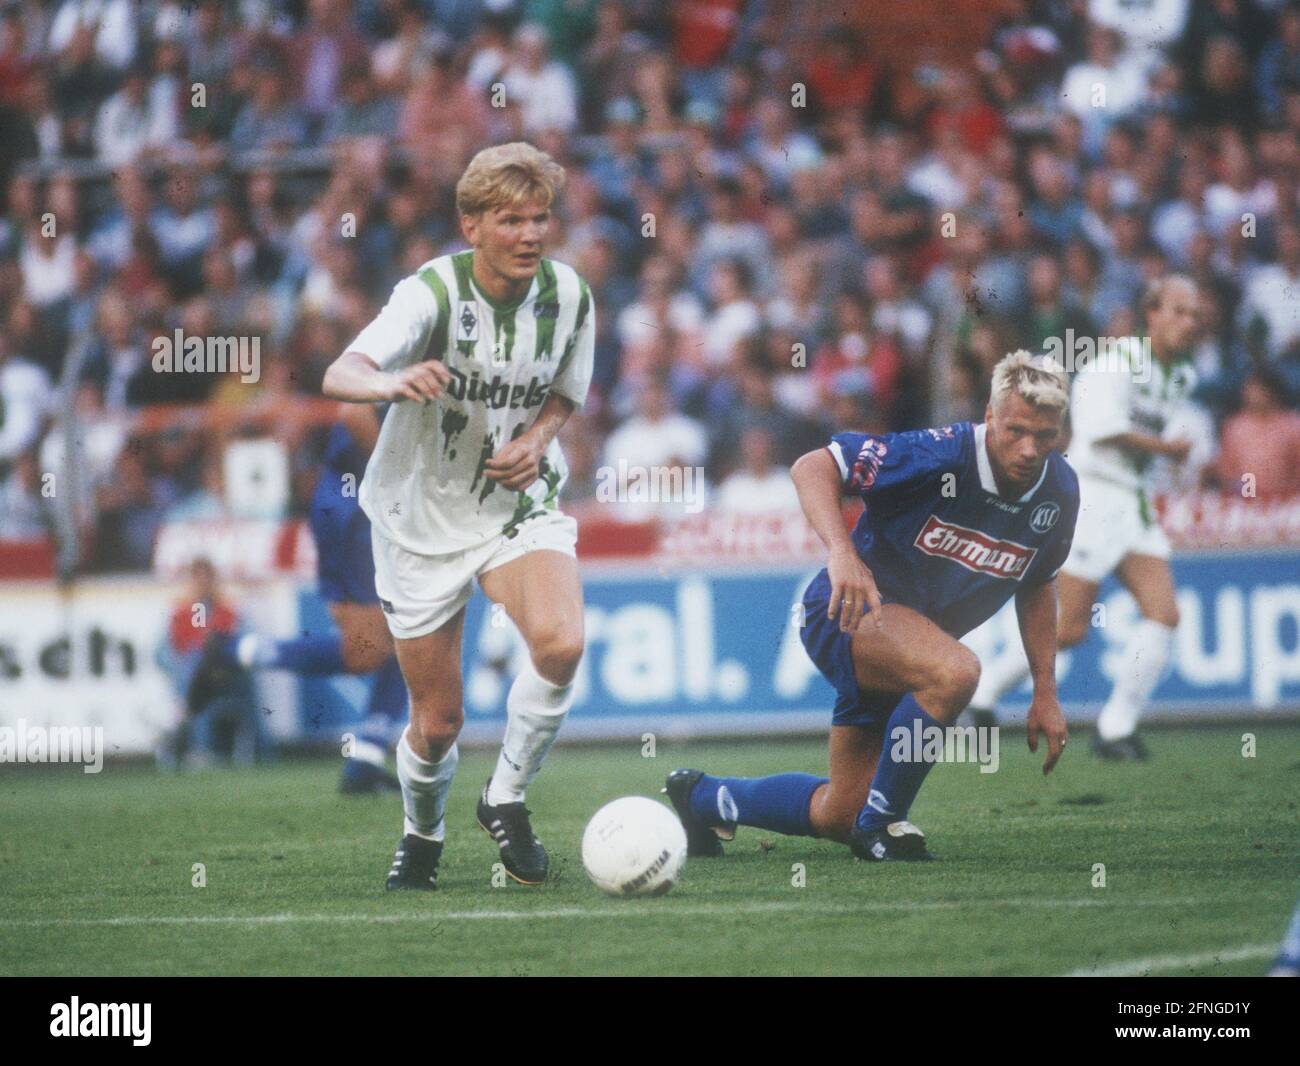 Borussia Mönchengladbach - Karlsruher SC 3:2/24/08/1994 Stefan Effenberg (BMG) action on the ball. Re: Thorsten Fink (KSC). Only for journalistic use! Only for editorial use! Copyright only for journalistic use ! Only for editorial use! [automated translation] Stock Photo